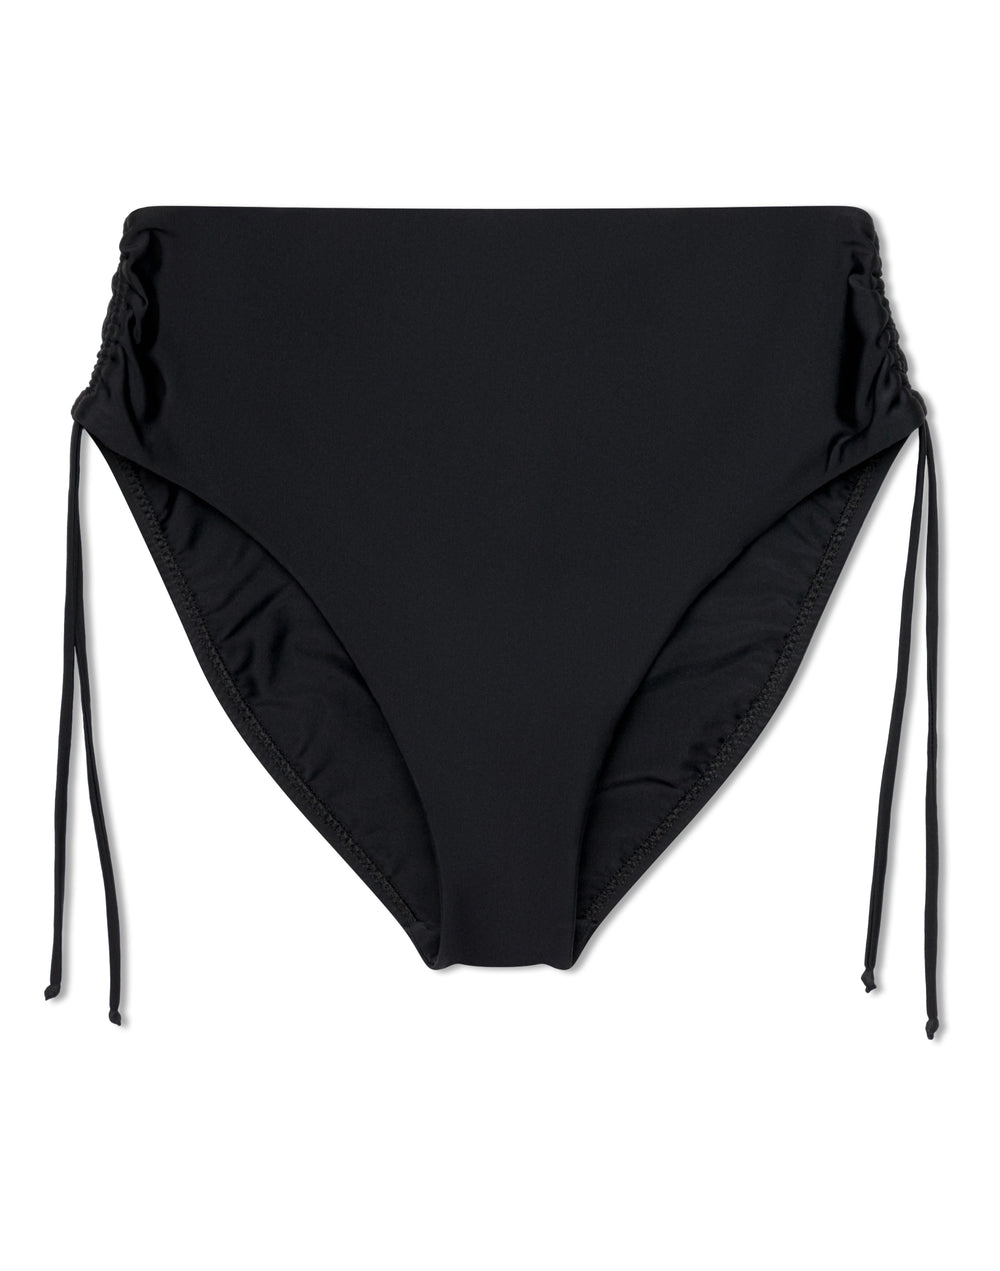 Rouched Bottom in Noir